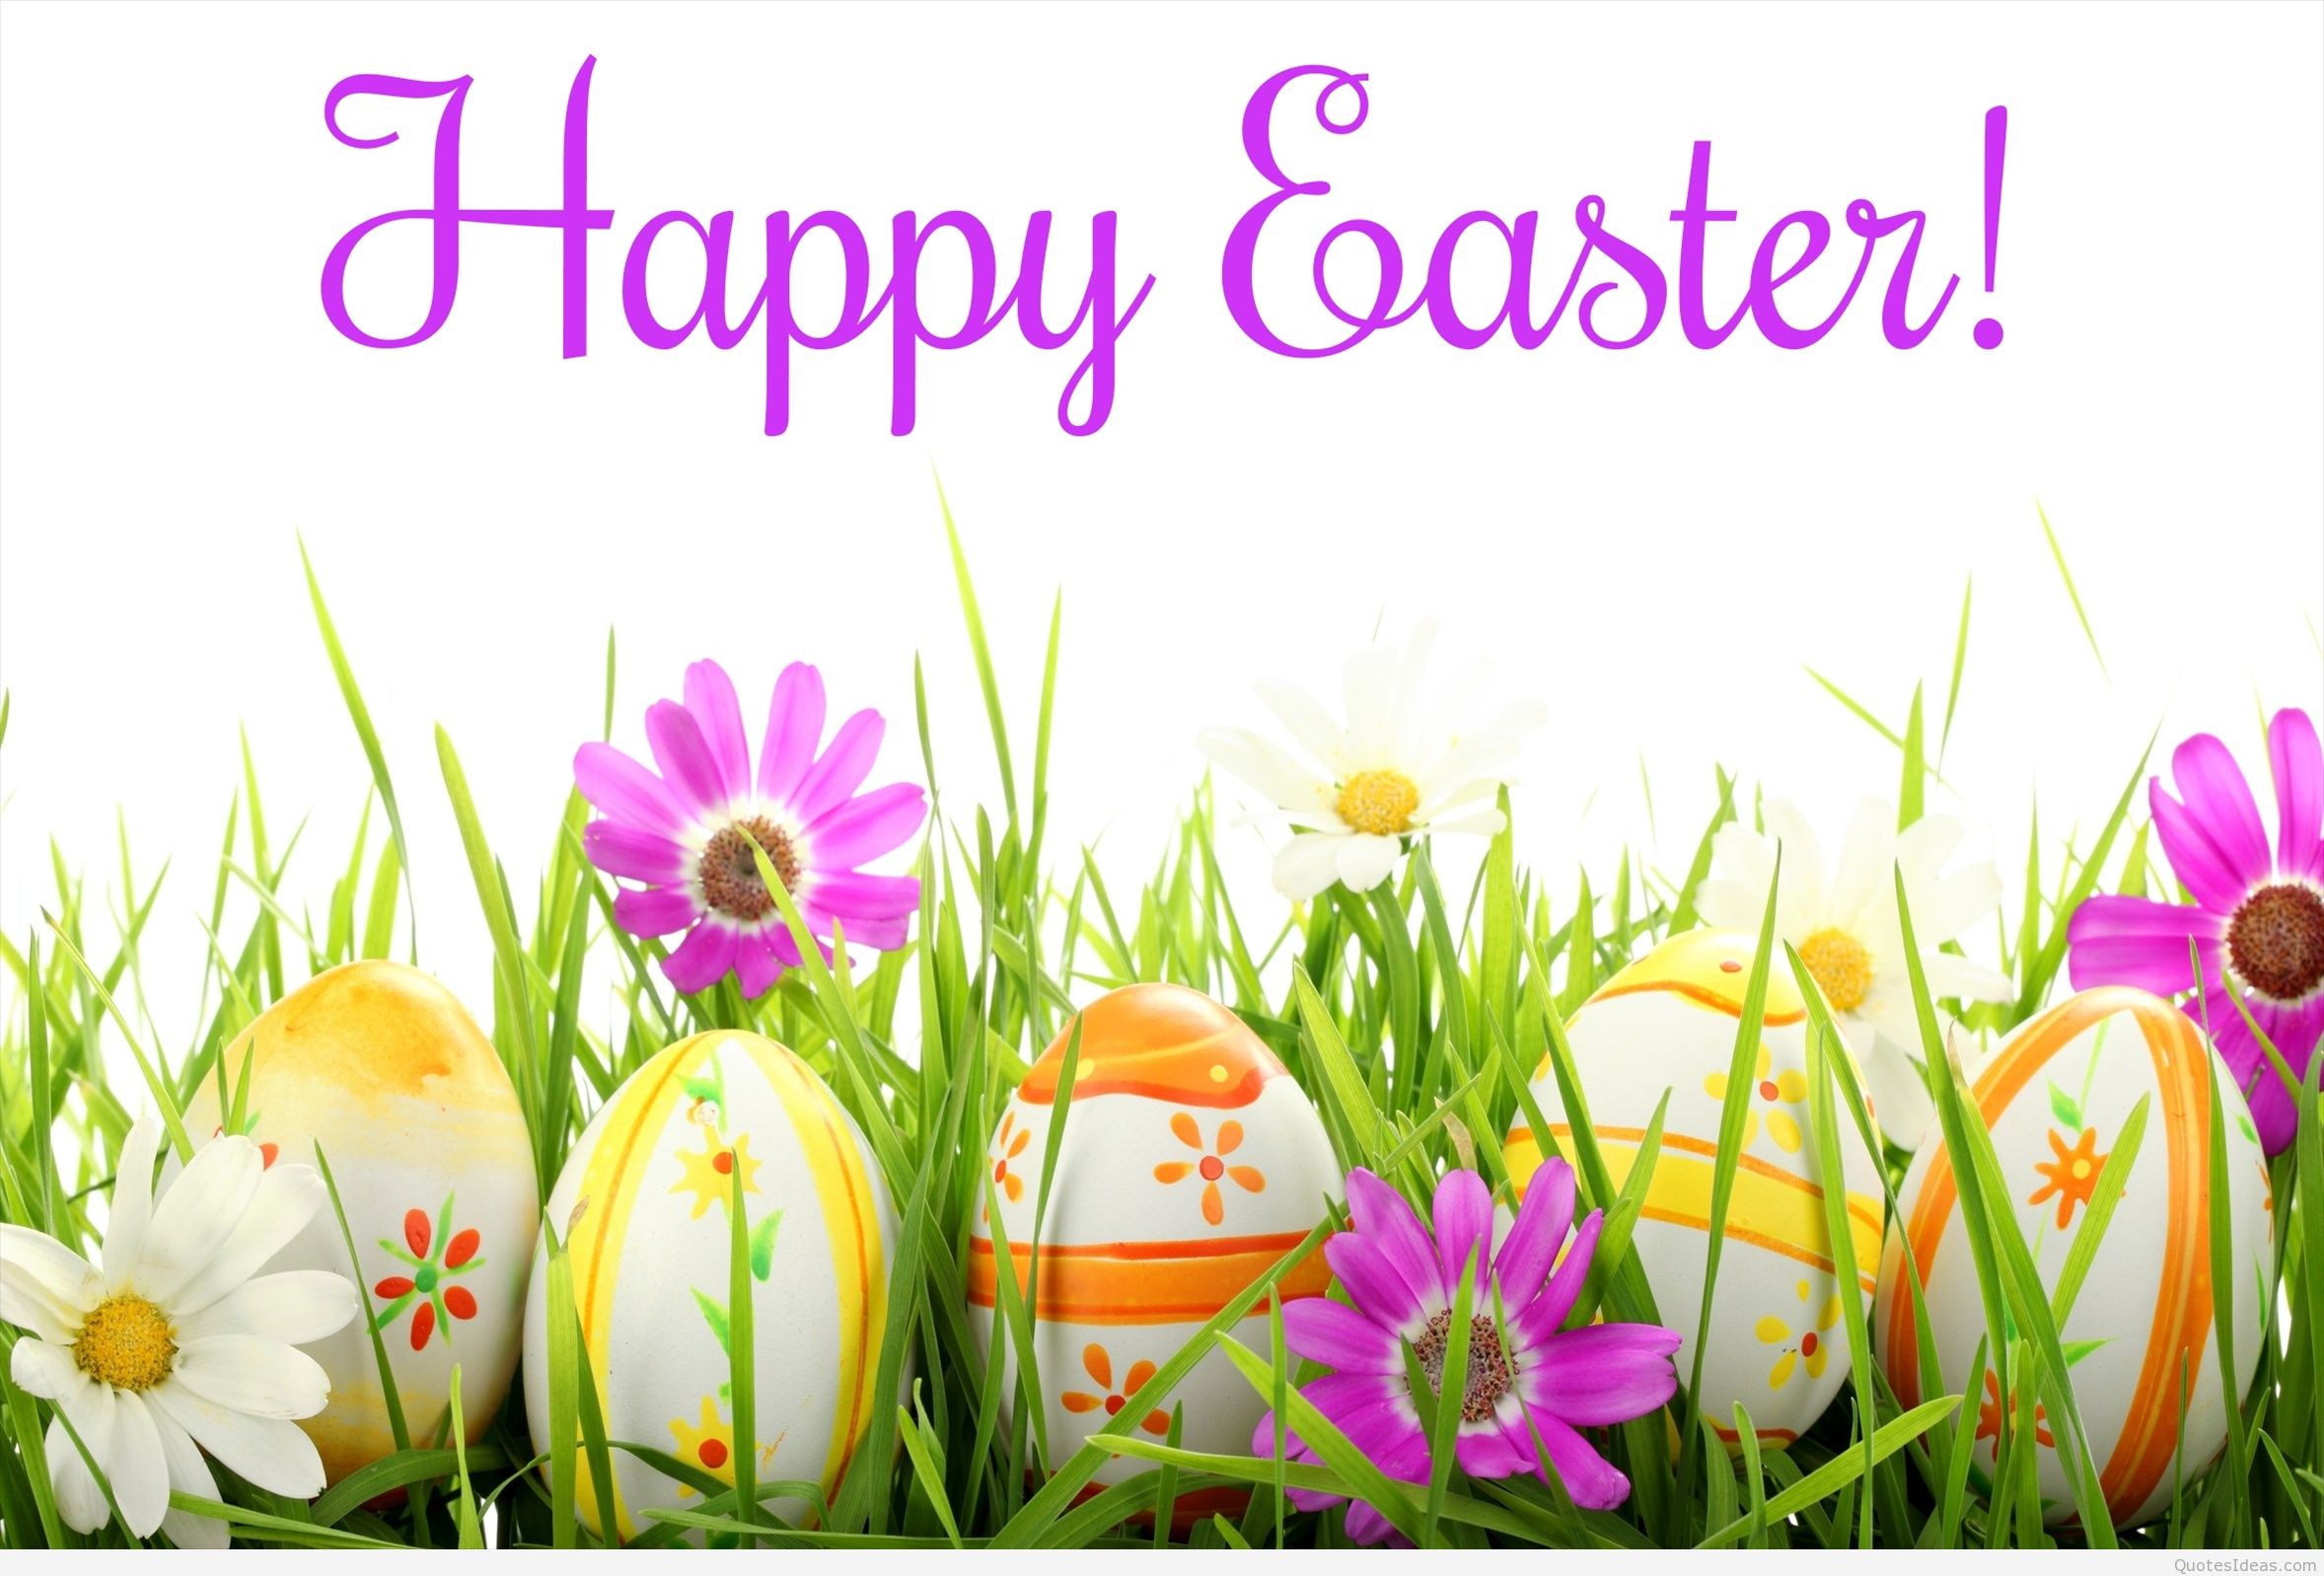 Happy Easter sunday wallpapers hd wishes